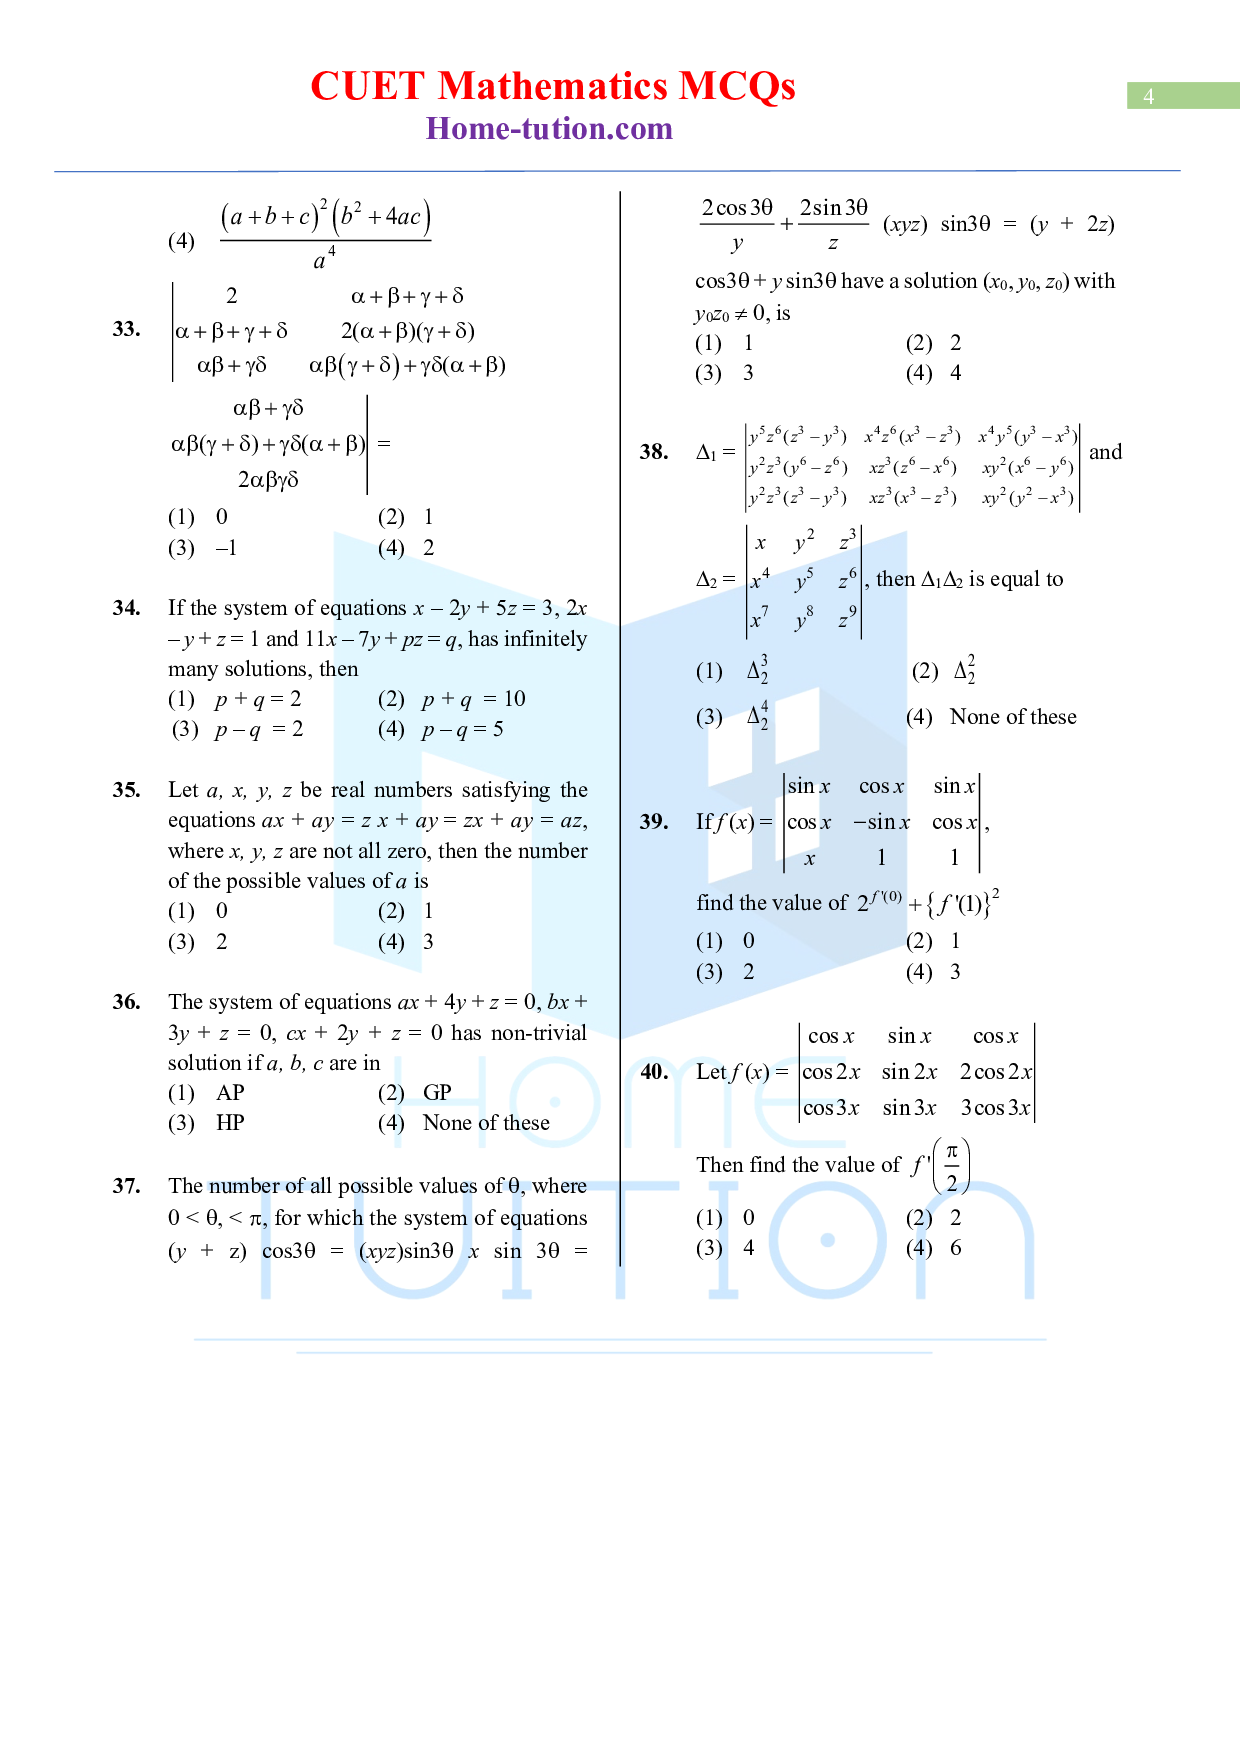 CUET MCQ Questions For Maths Chapter-4 Determinants